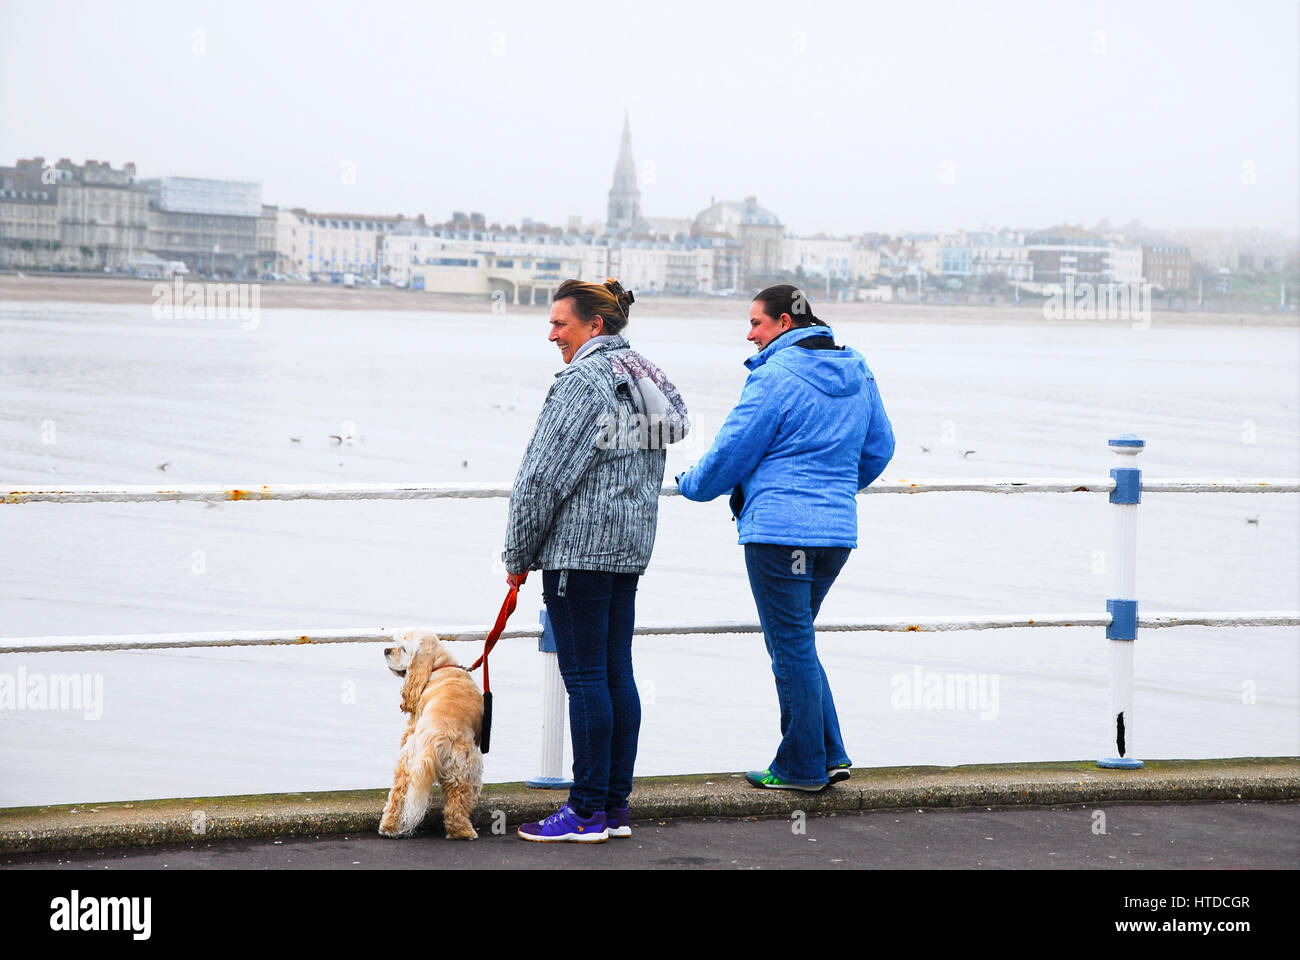 Weymouth & Portland, Dorset, 2017, Rising temperatures brings sea mist, as people enjoy the beach and the harbour on an overcast day Stock Photo